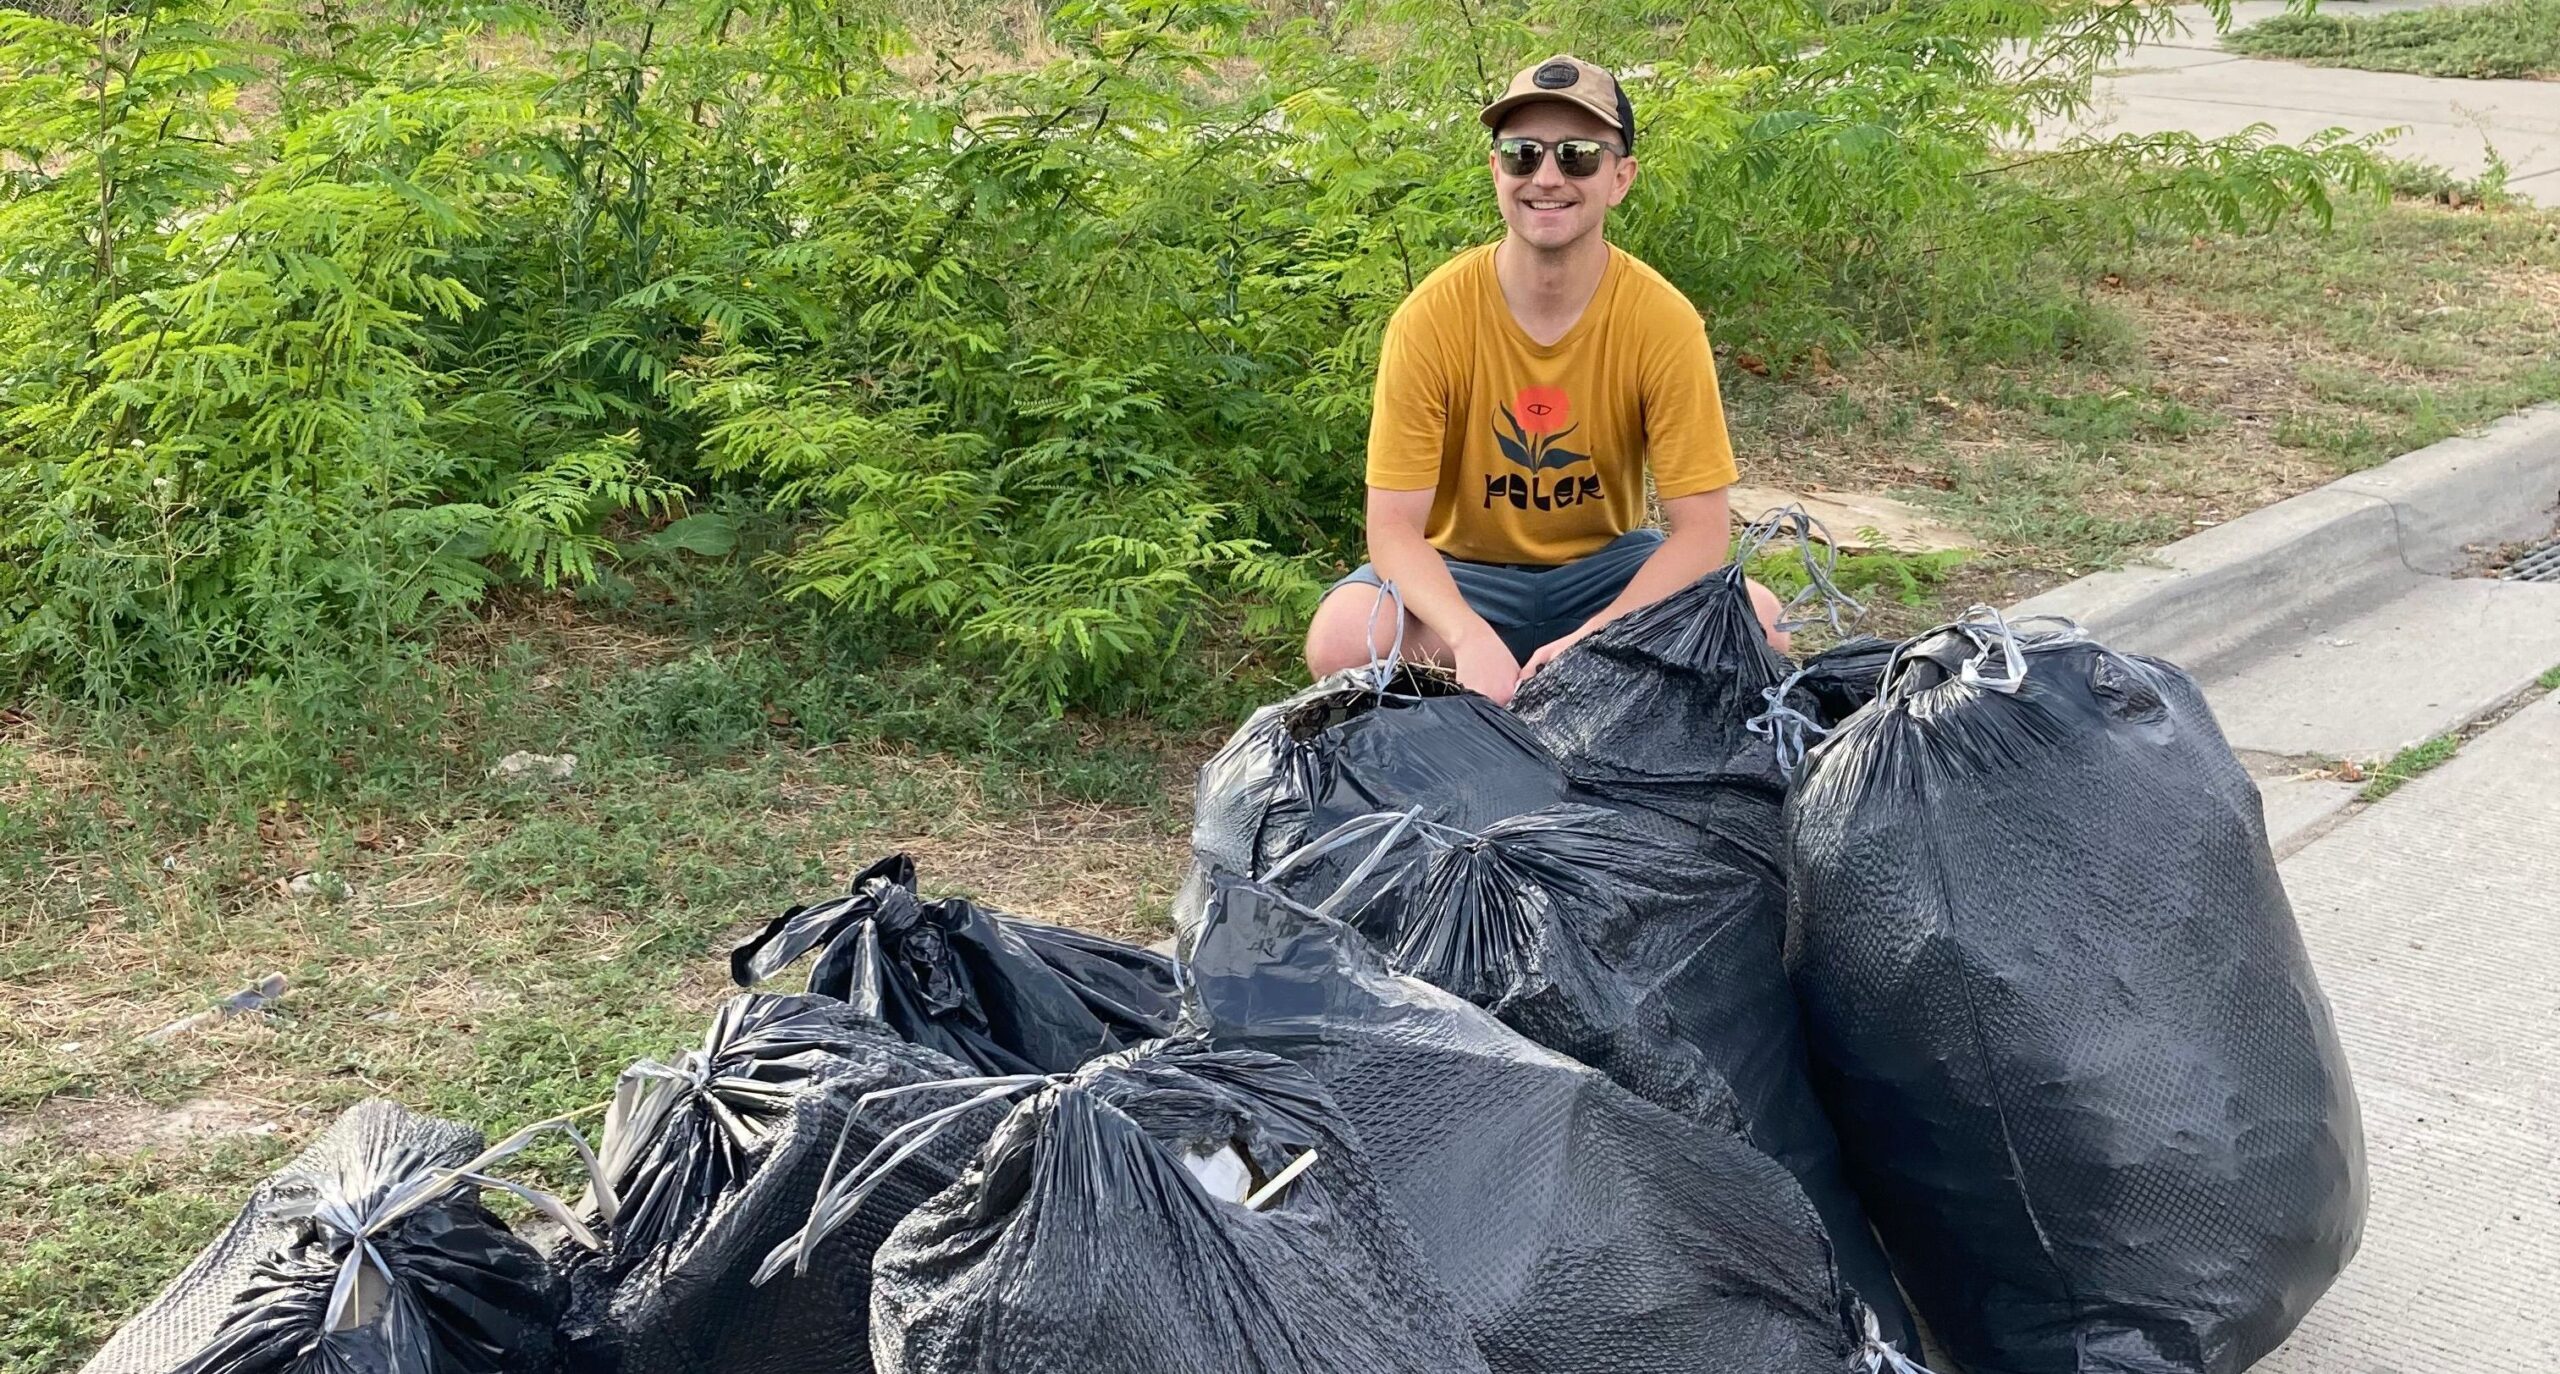 Ryland Hosenfield sits near bags of trash. His family is continuing his cleanup legacy